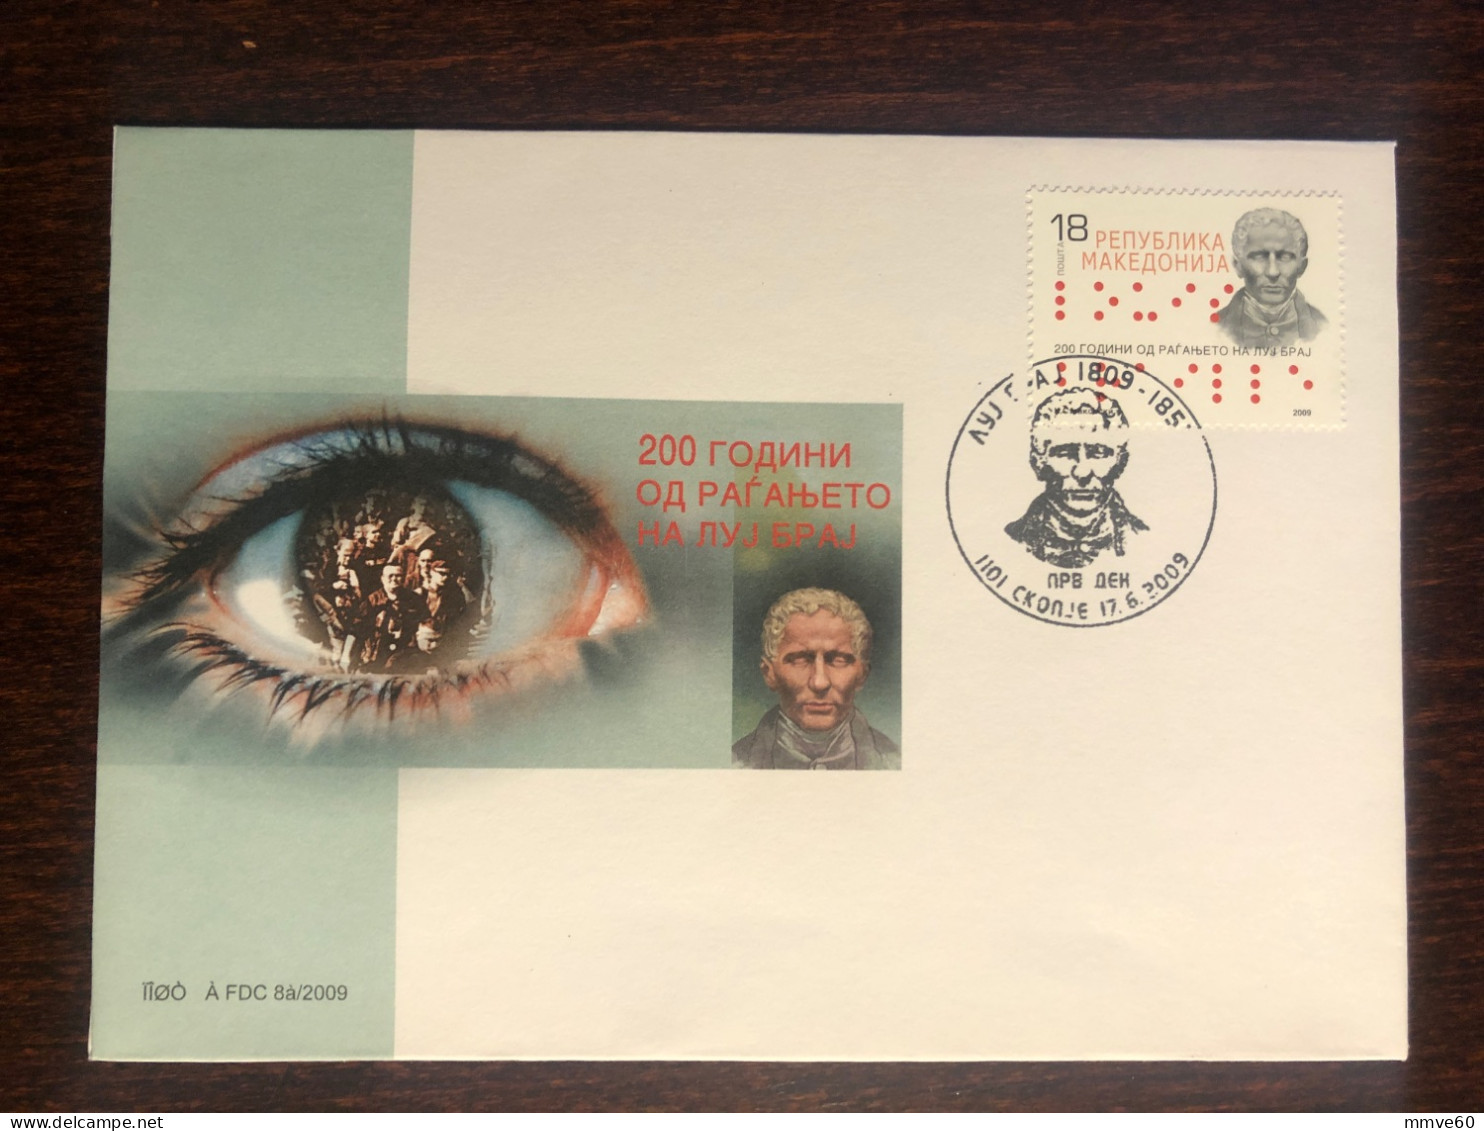 MACEDONIA FDC COVER 2009 YEAR  BLINDNESS BLIND BRAILLE HEALTH MEDICINE STAMPS - Macedonia Del Norte